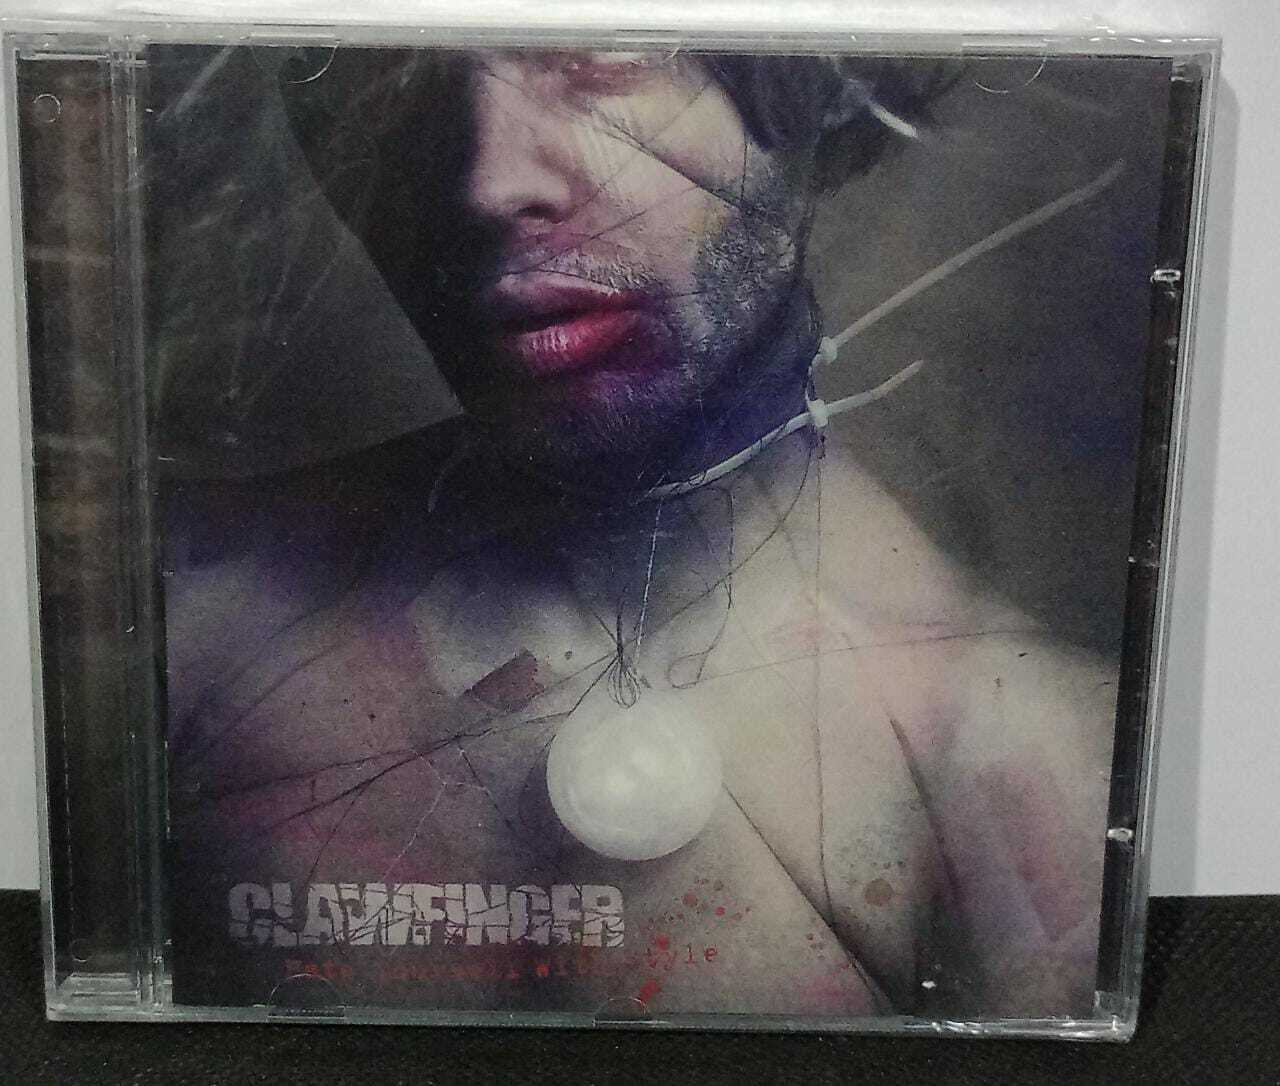 CD - Clawfinger - Hate Yourself With Style (Lacrado)